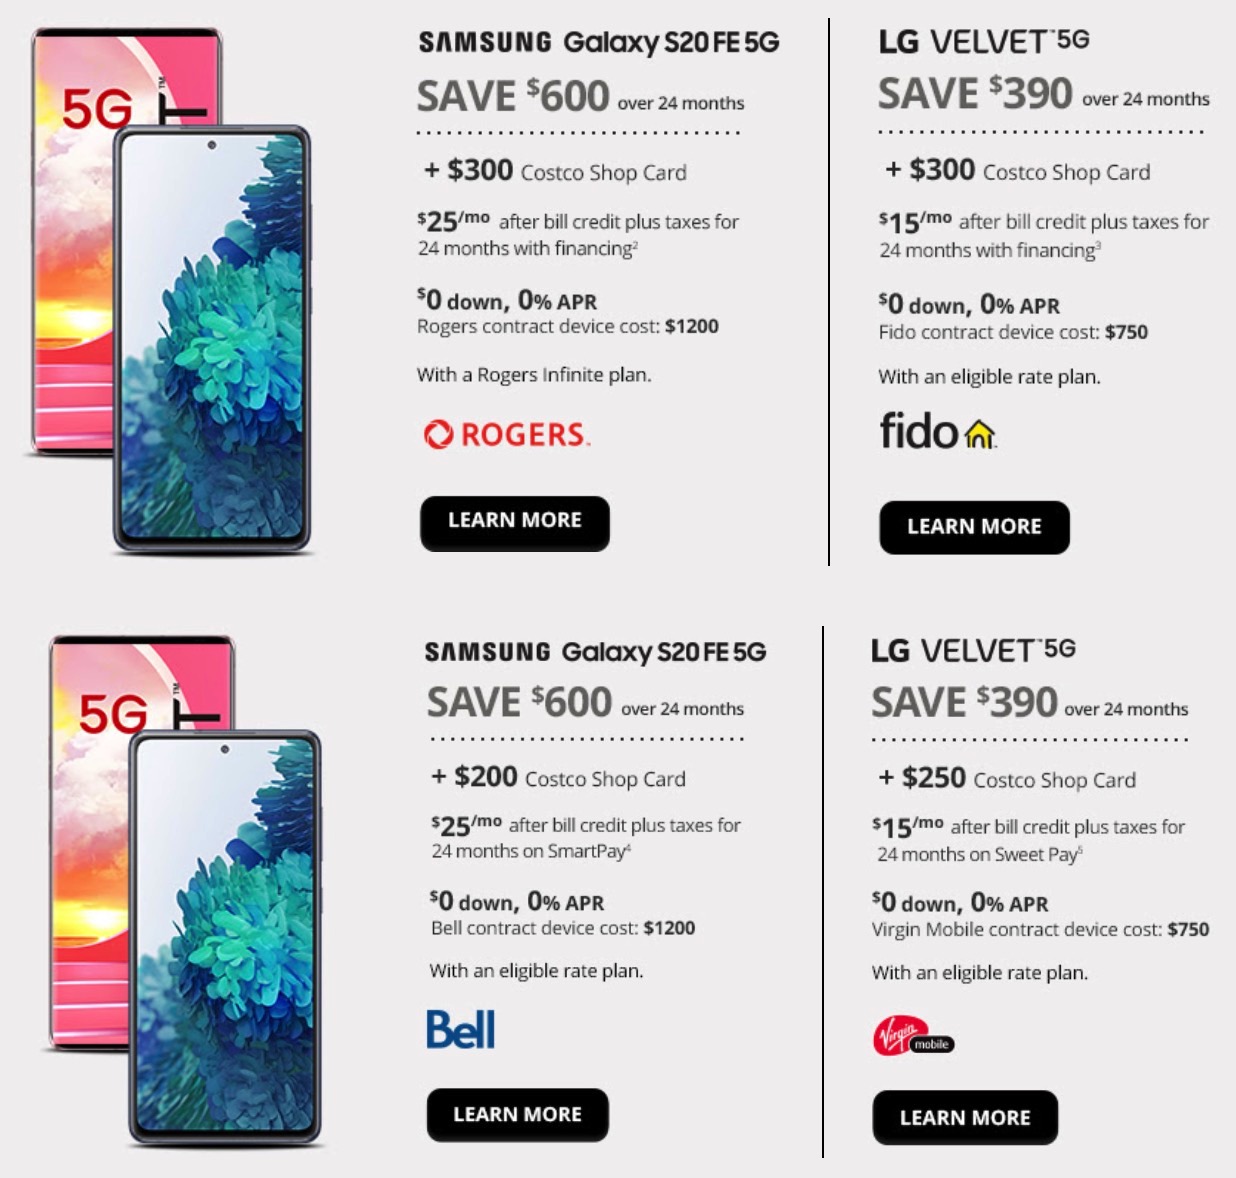 Costco Black Friday 2020 Cellphone Deals: Up to $300 Gift Cards | iPhone in Canada Blog